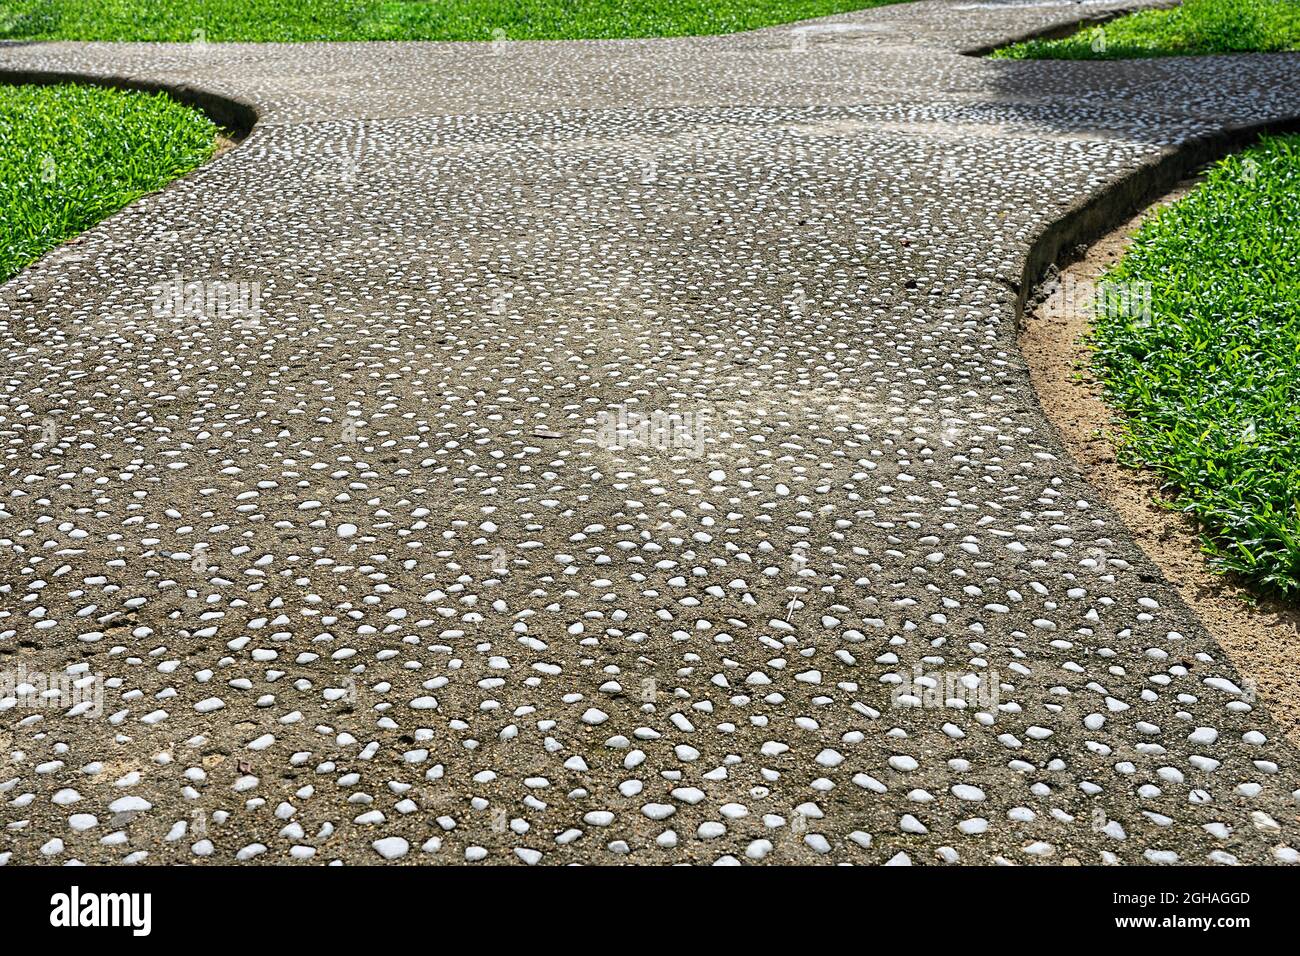 Garden pathway covered with small white stones. Pebble walkway in the garden Stock Photo